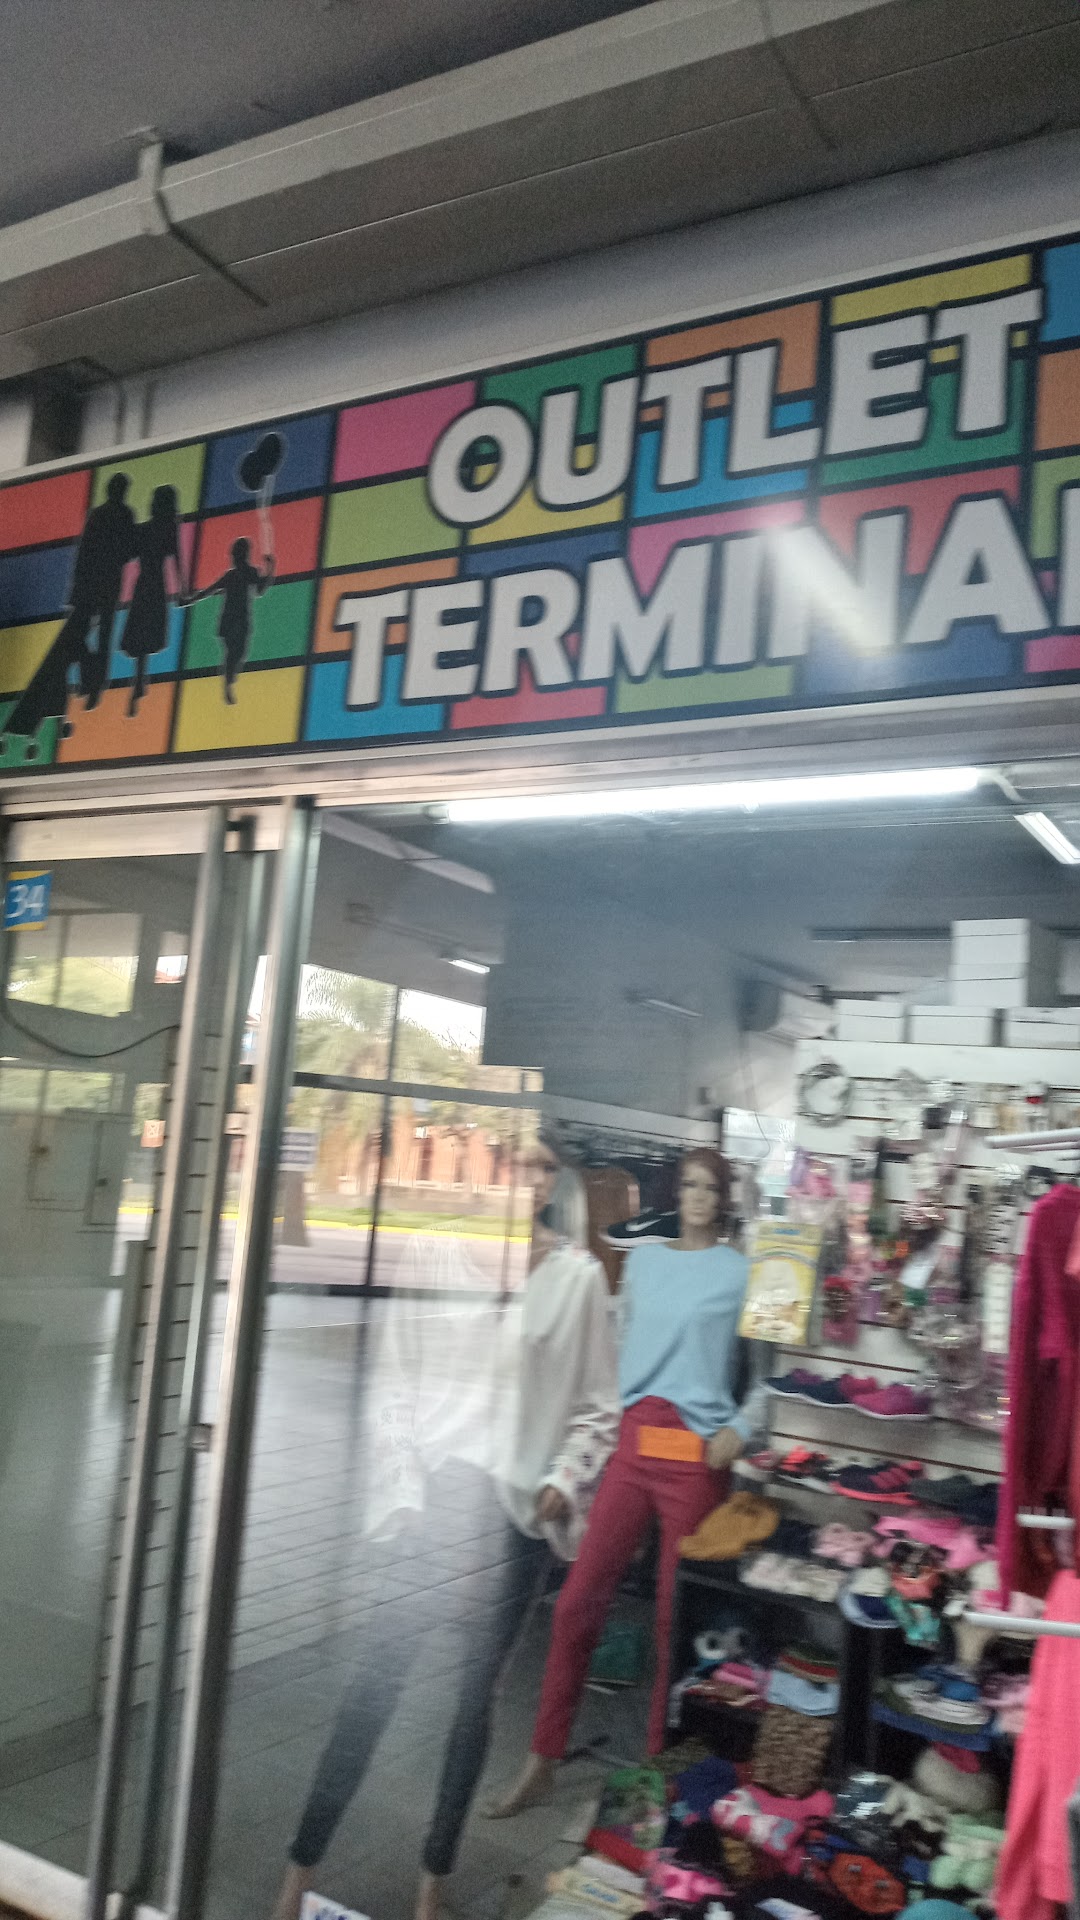 Outlet teeminal